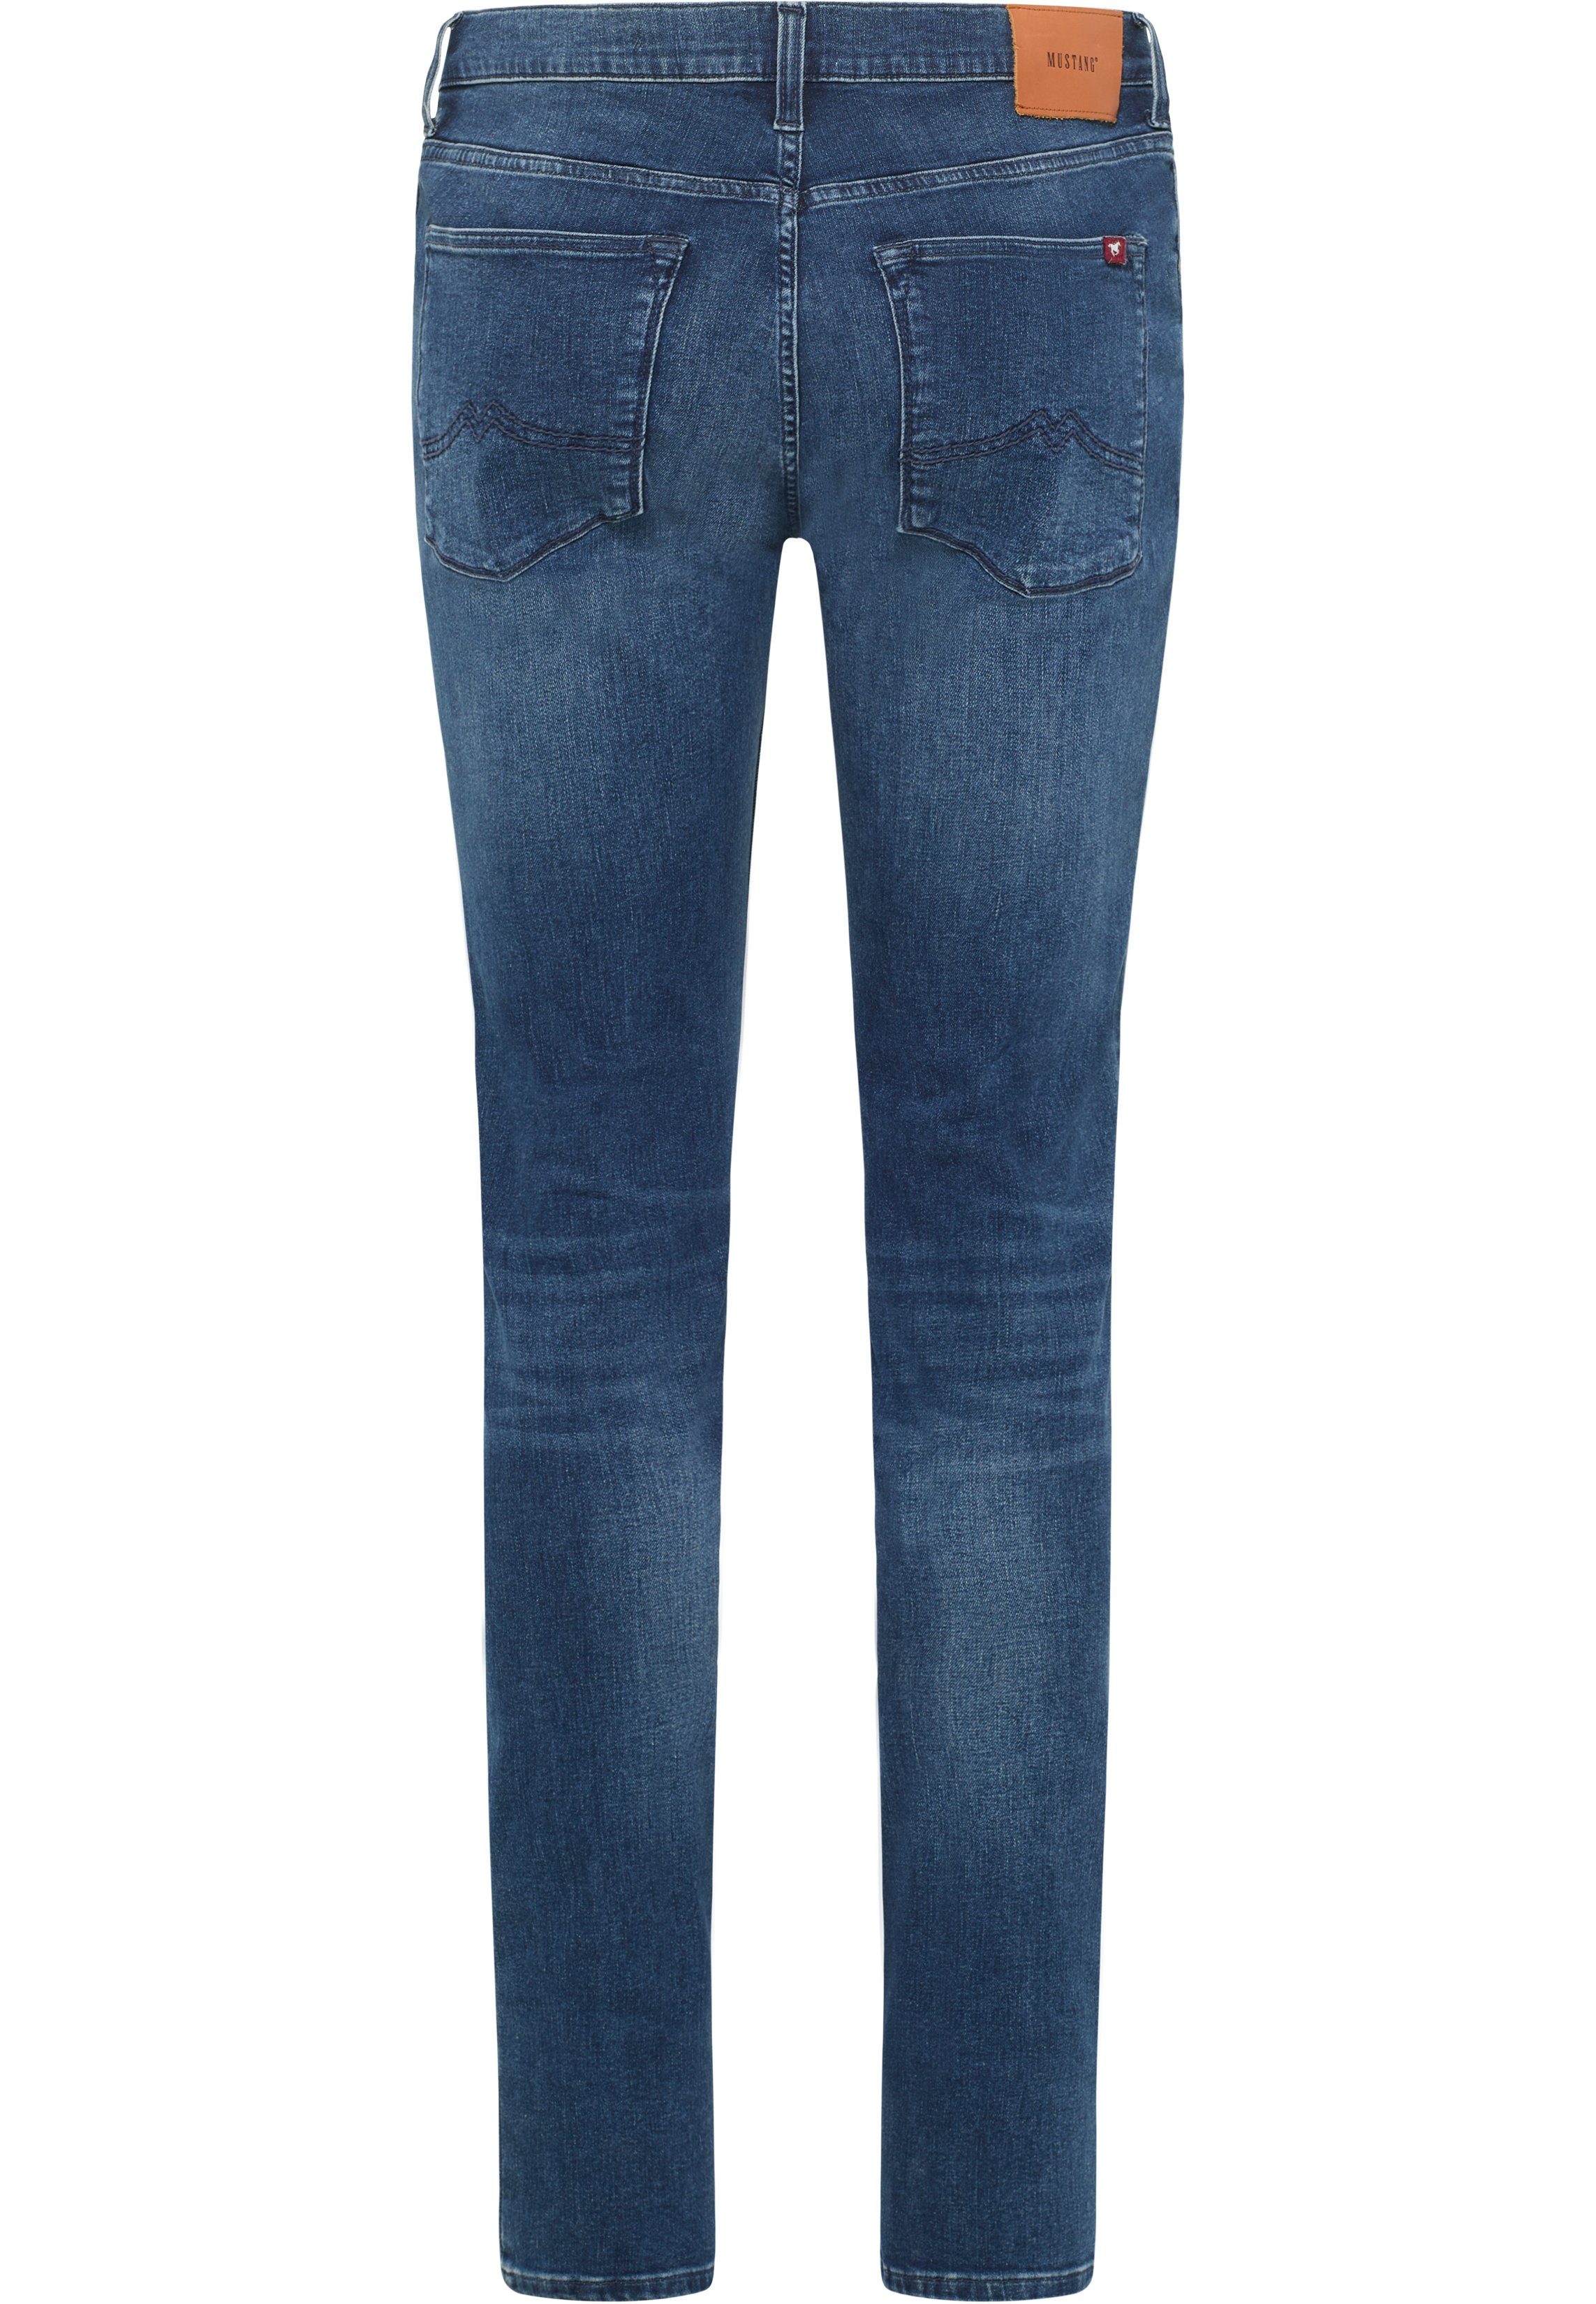 MUSTANG Frisco 5-Pocket-Jeans Style